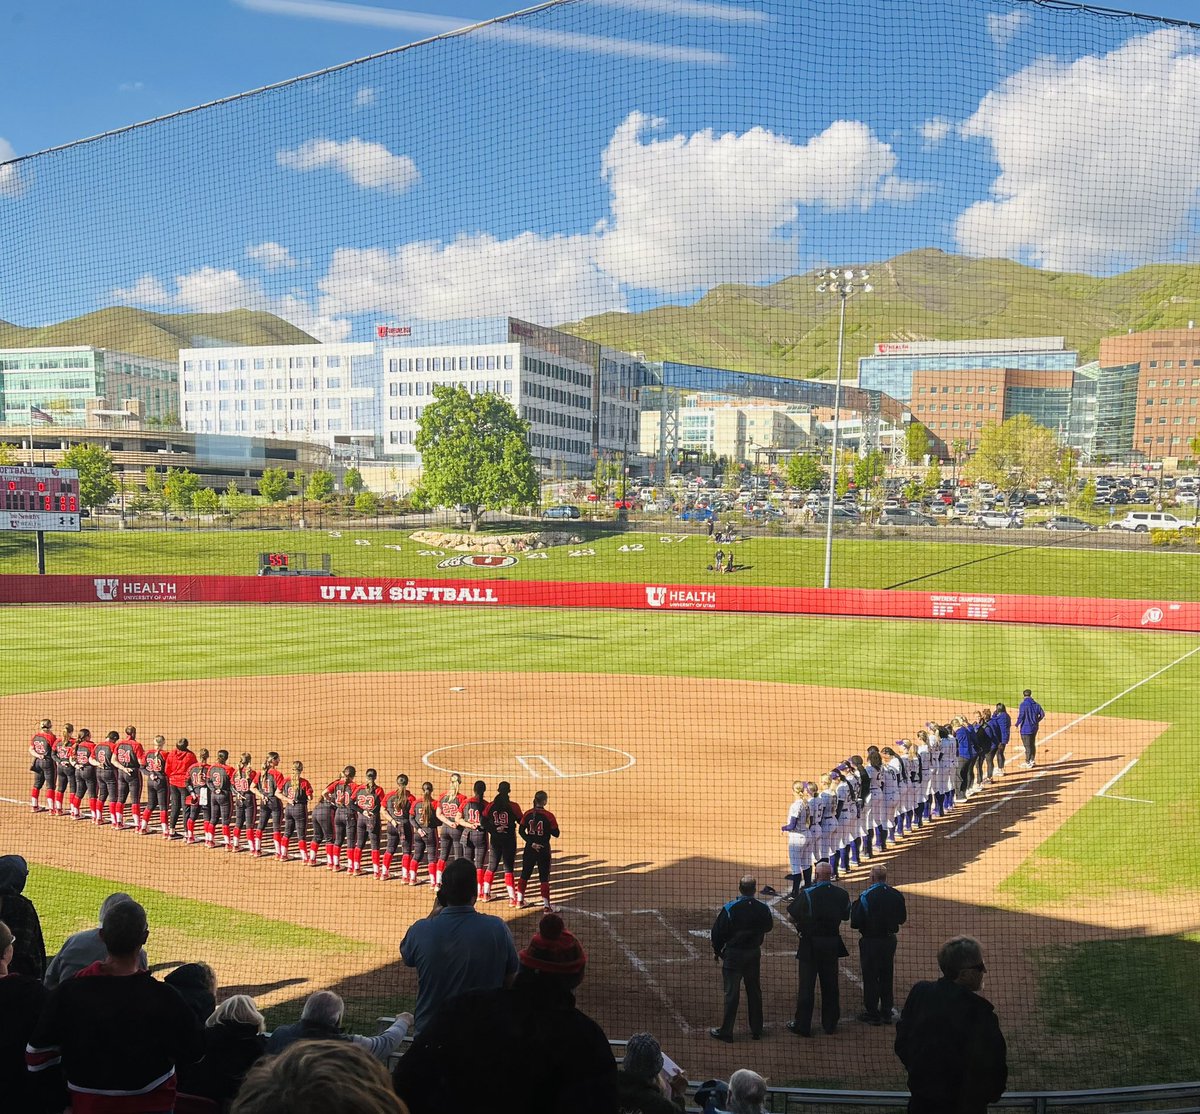 Final weekend of @pac12 Softball! Big series for @Utah_Softball making a push for post season! Will be tested against a very good #9 @UWSoftball team as they make a push to Host @NCAASoftball With All American Pitcher @ArizonaSoftball @KenzieFowler19 Let’s GO! @Pac12Network